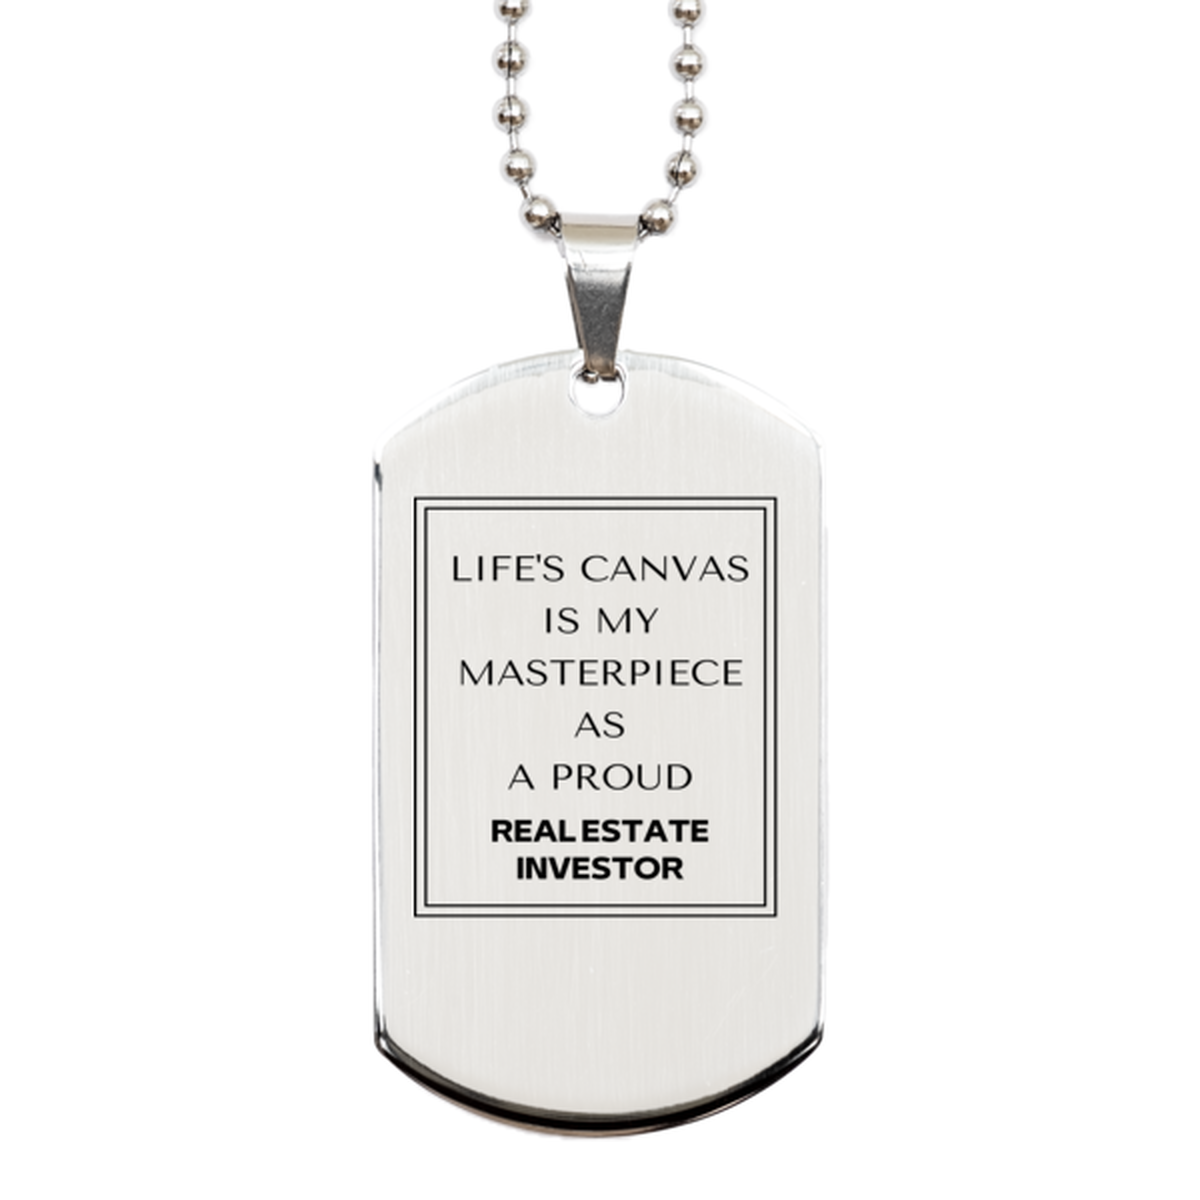 Proud Real Estate Investor Gifts, Life's canvas is my masterpiece, Epic Birthday Christmas Unique Silver Dog Tag For Real Estate Investor, Coworkers, Men, Women, Friends